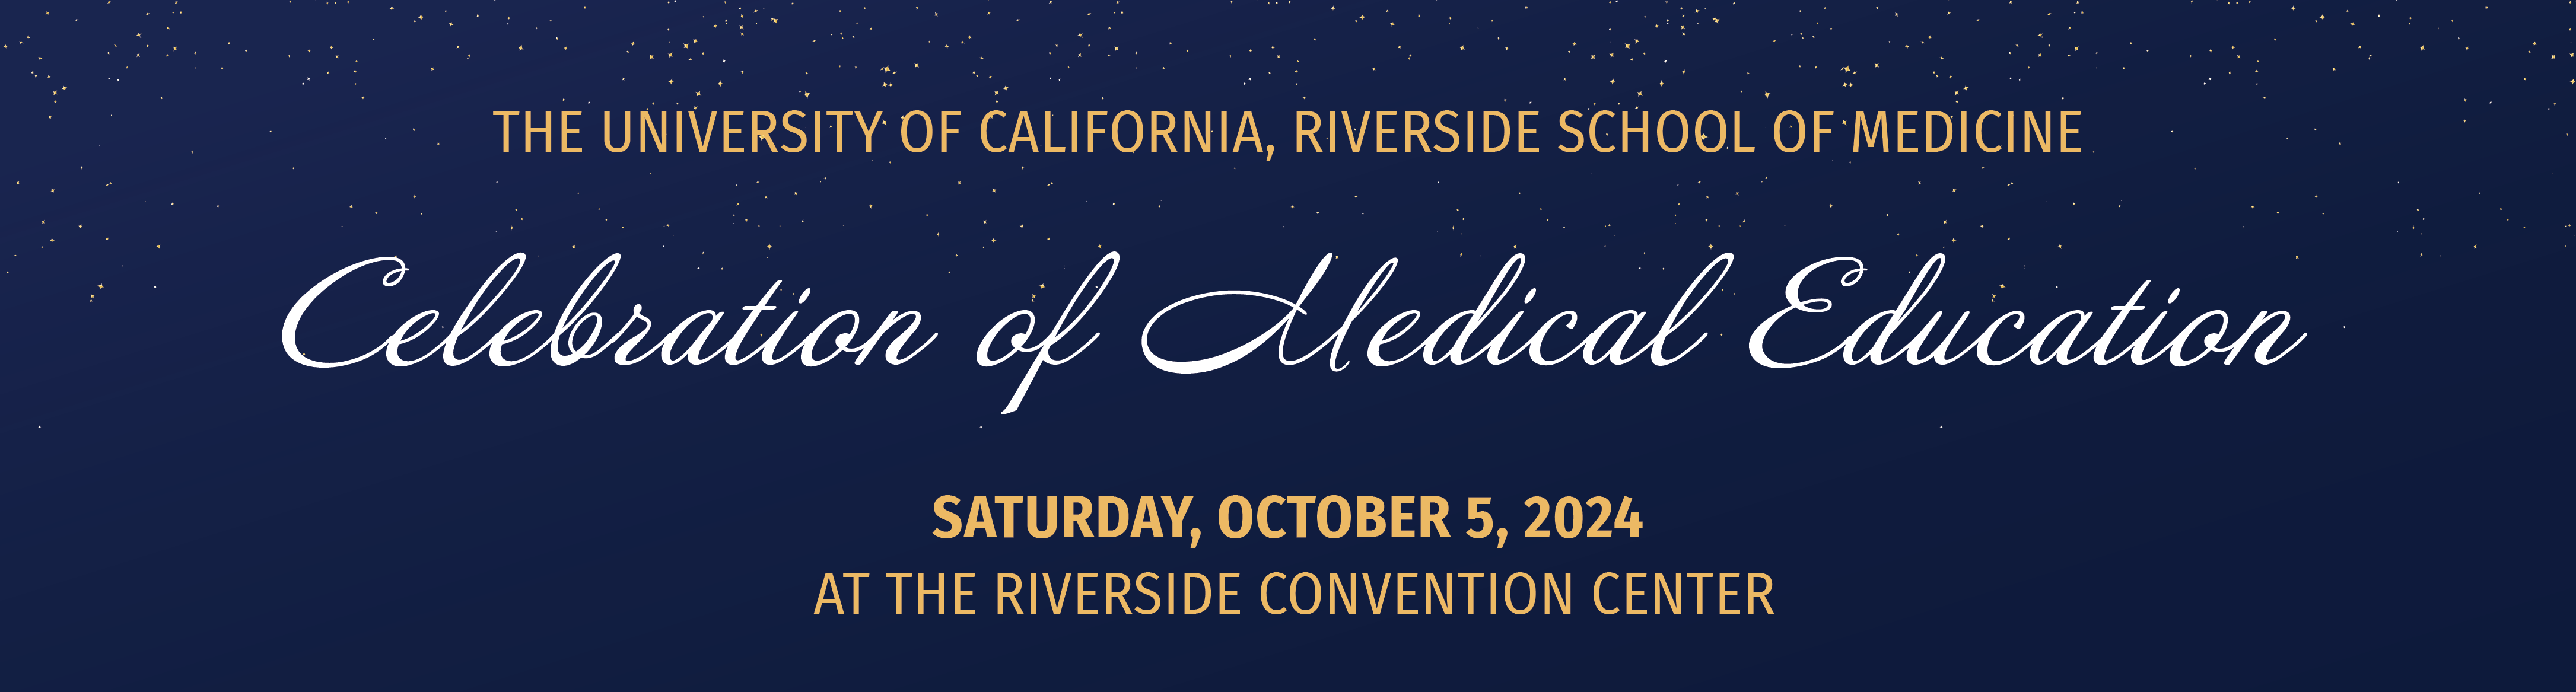 The university of california school of Medicine Celebration of Medical education - Saturday, October 5 2004 at the Riverside Convention Center